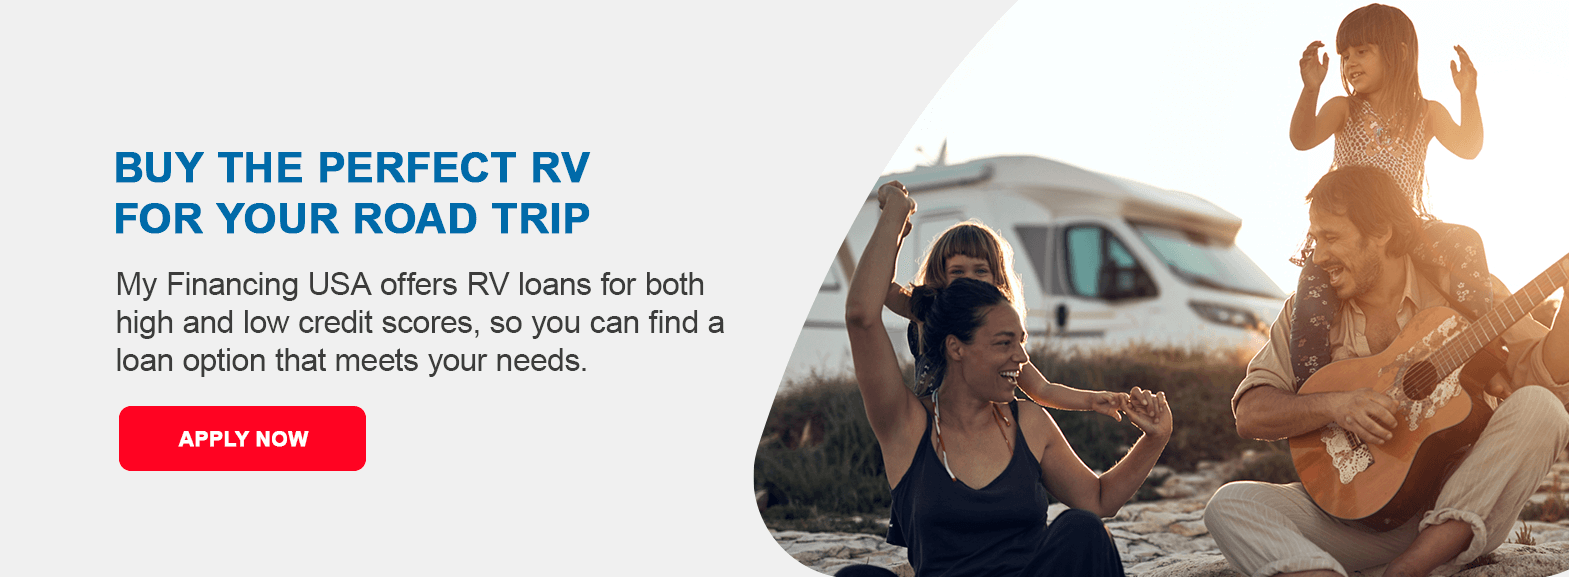 Buy the Perfect RV for Your Road Trip. My Financing USA offers RV loans for both high and low credit scores, so you can find a loan option that meets your needs. Apply now!